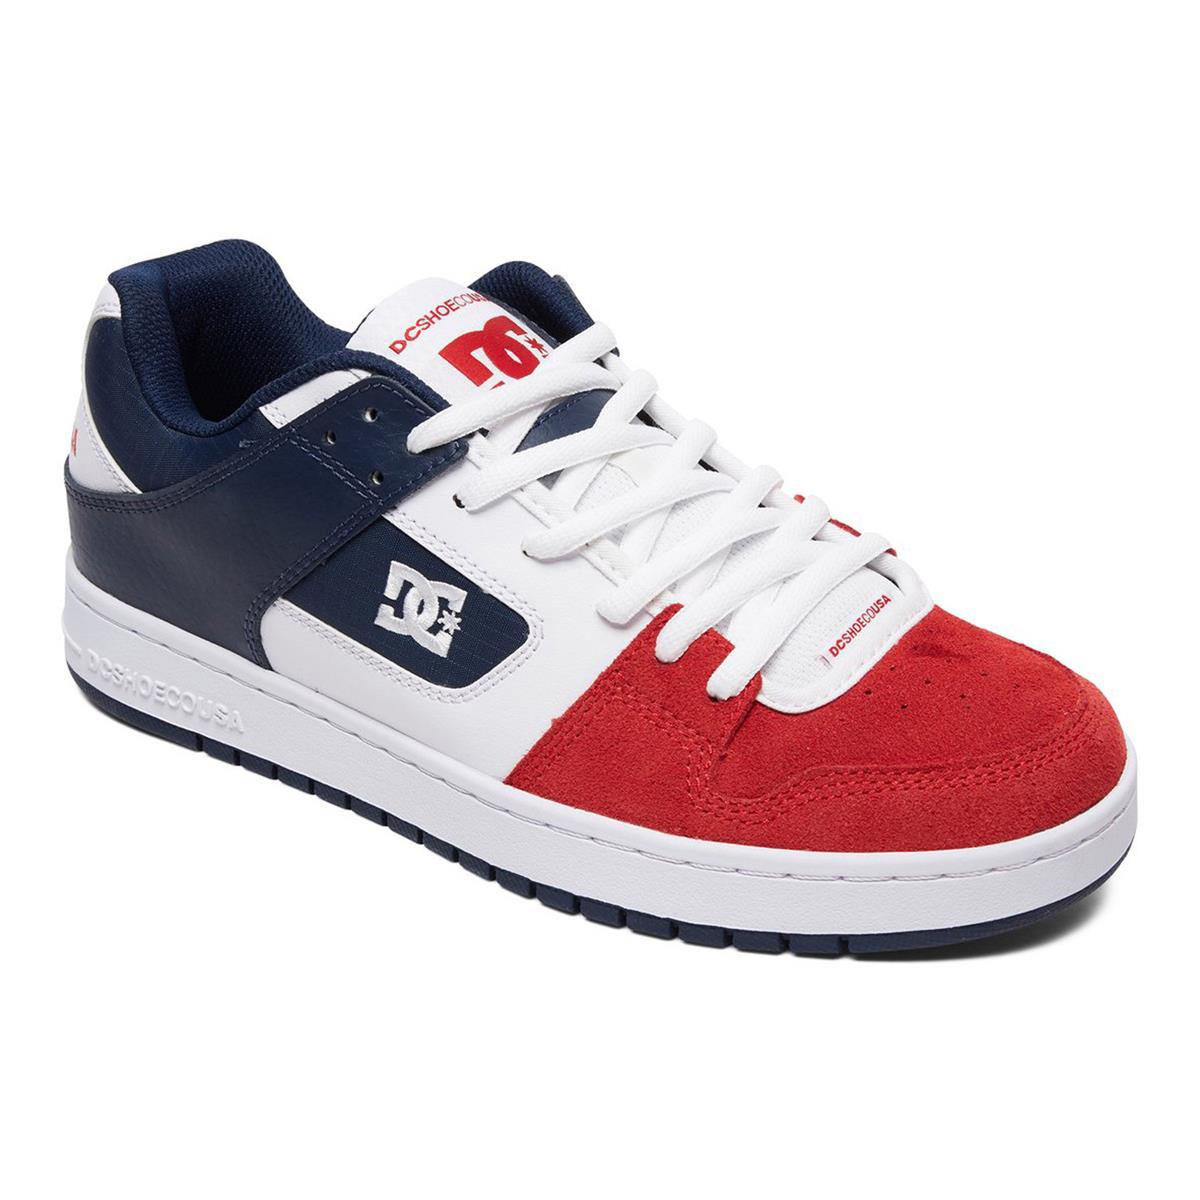 DC Shoes Manteca White/Navy/Red